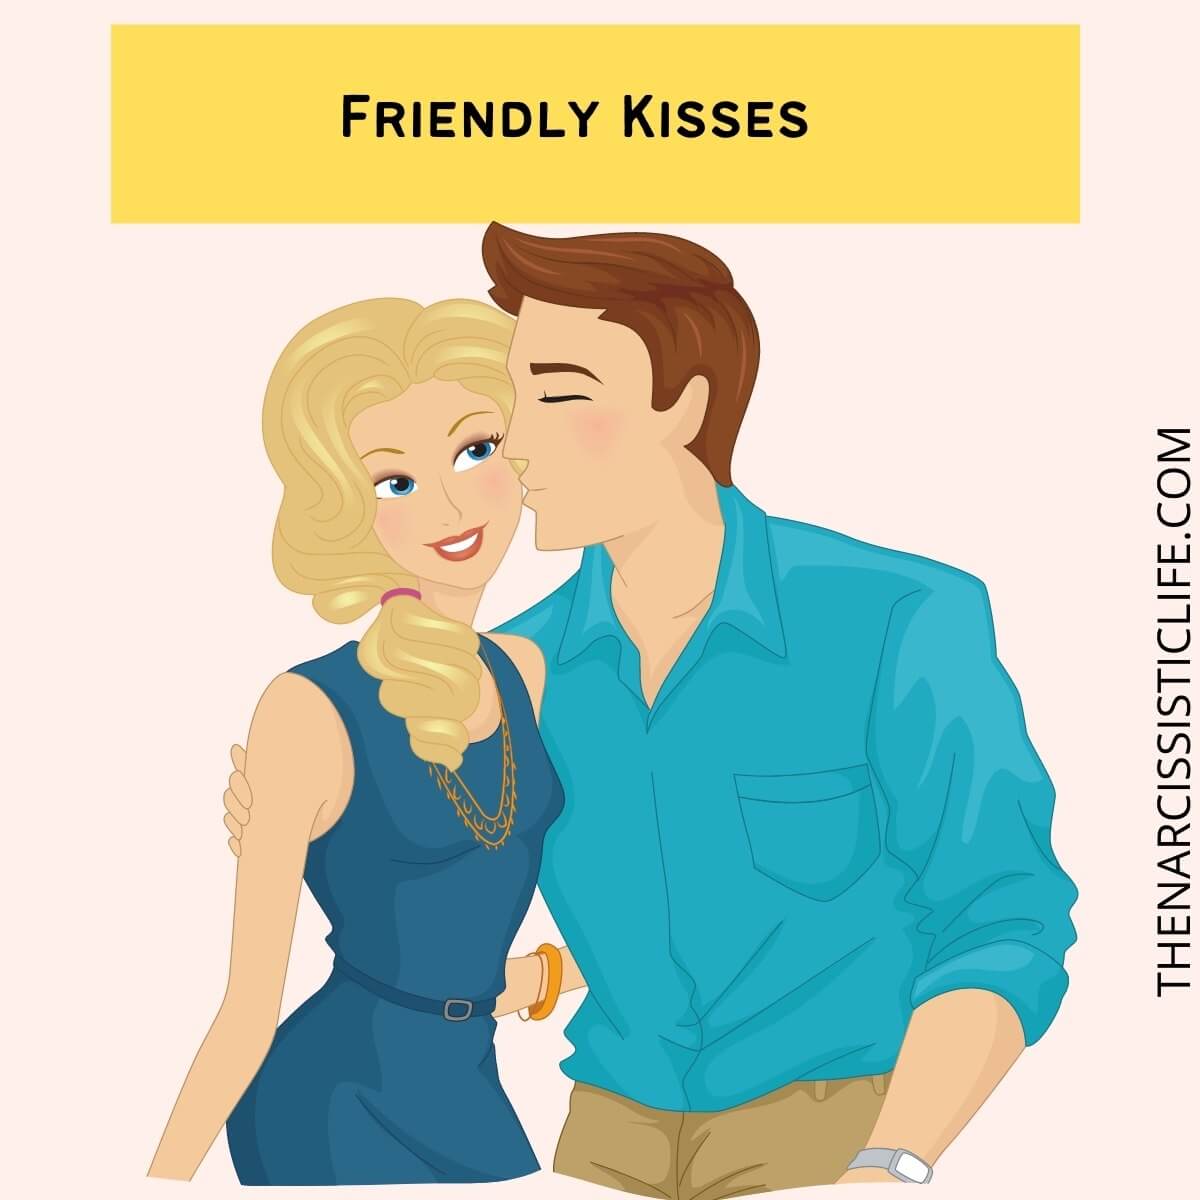 Happy International Kissing Day! 21 facts about locking lips